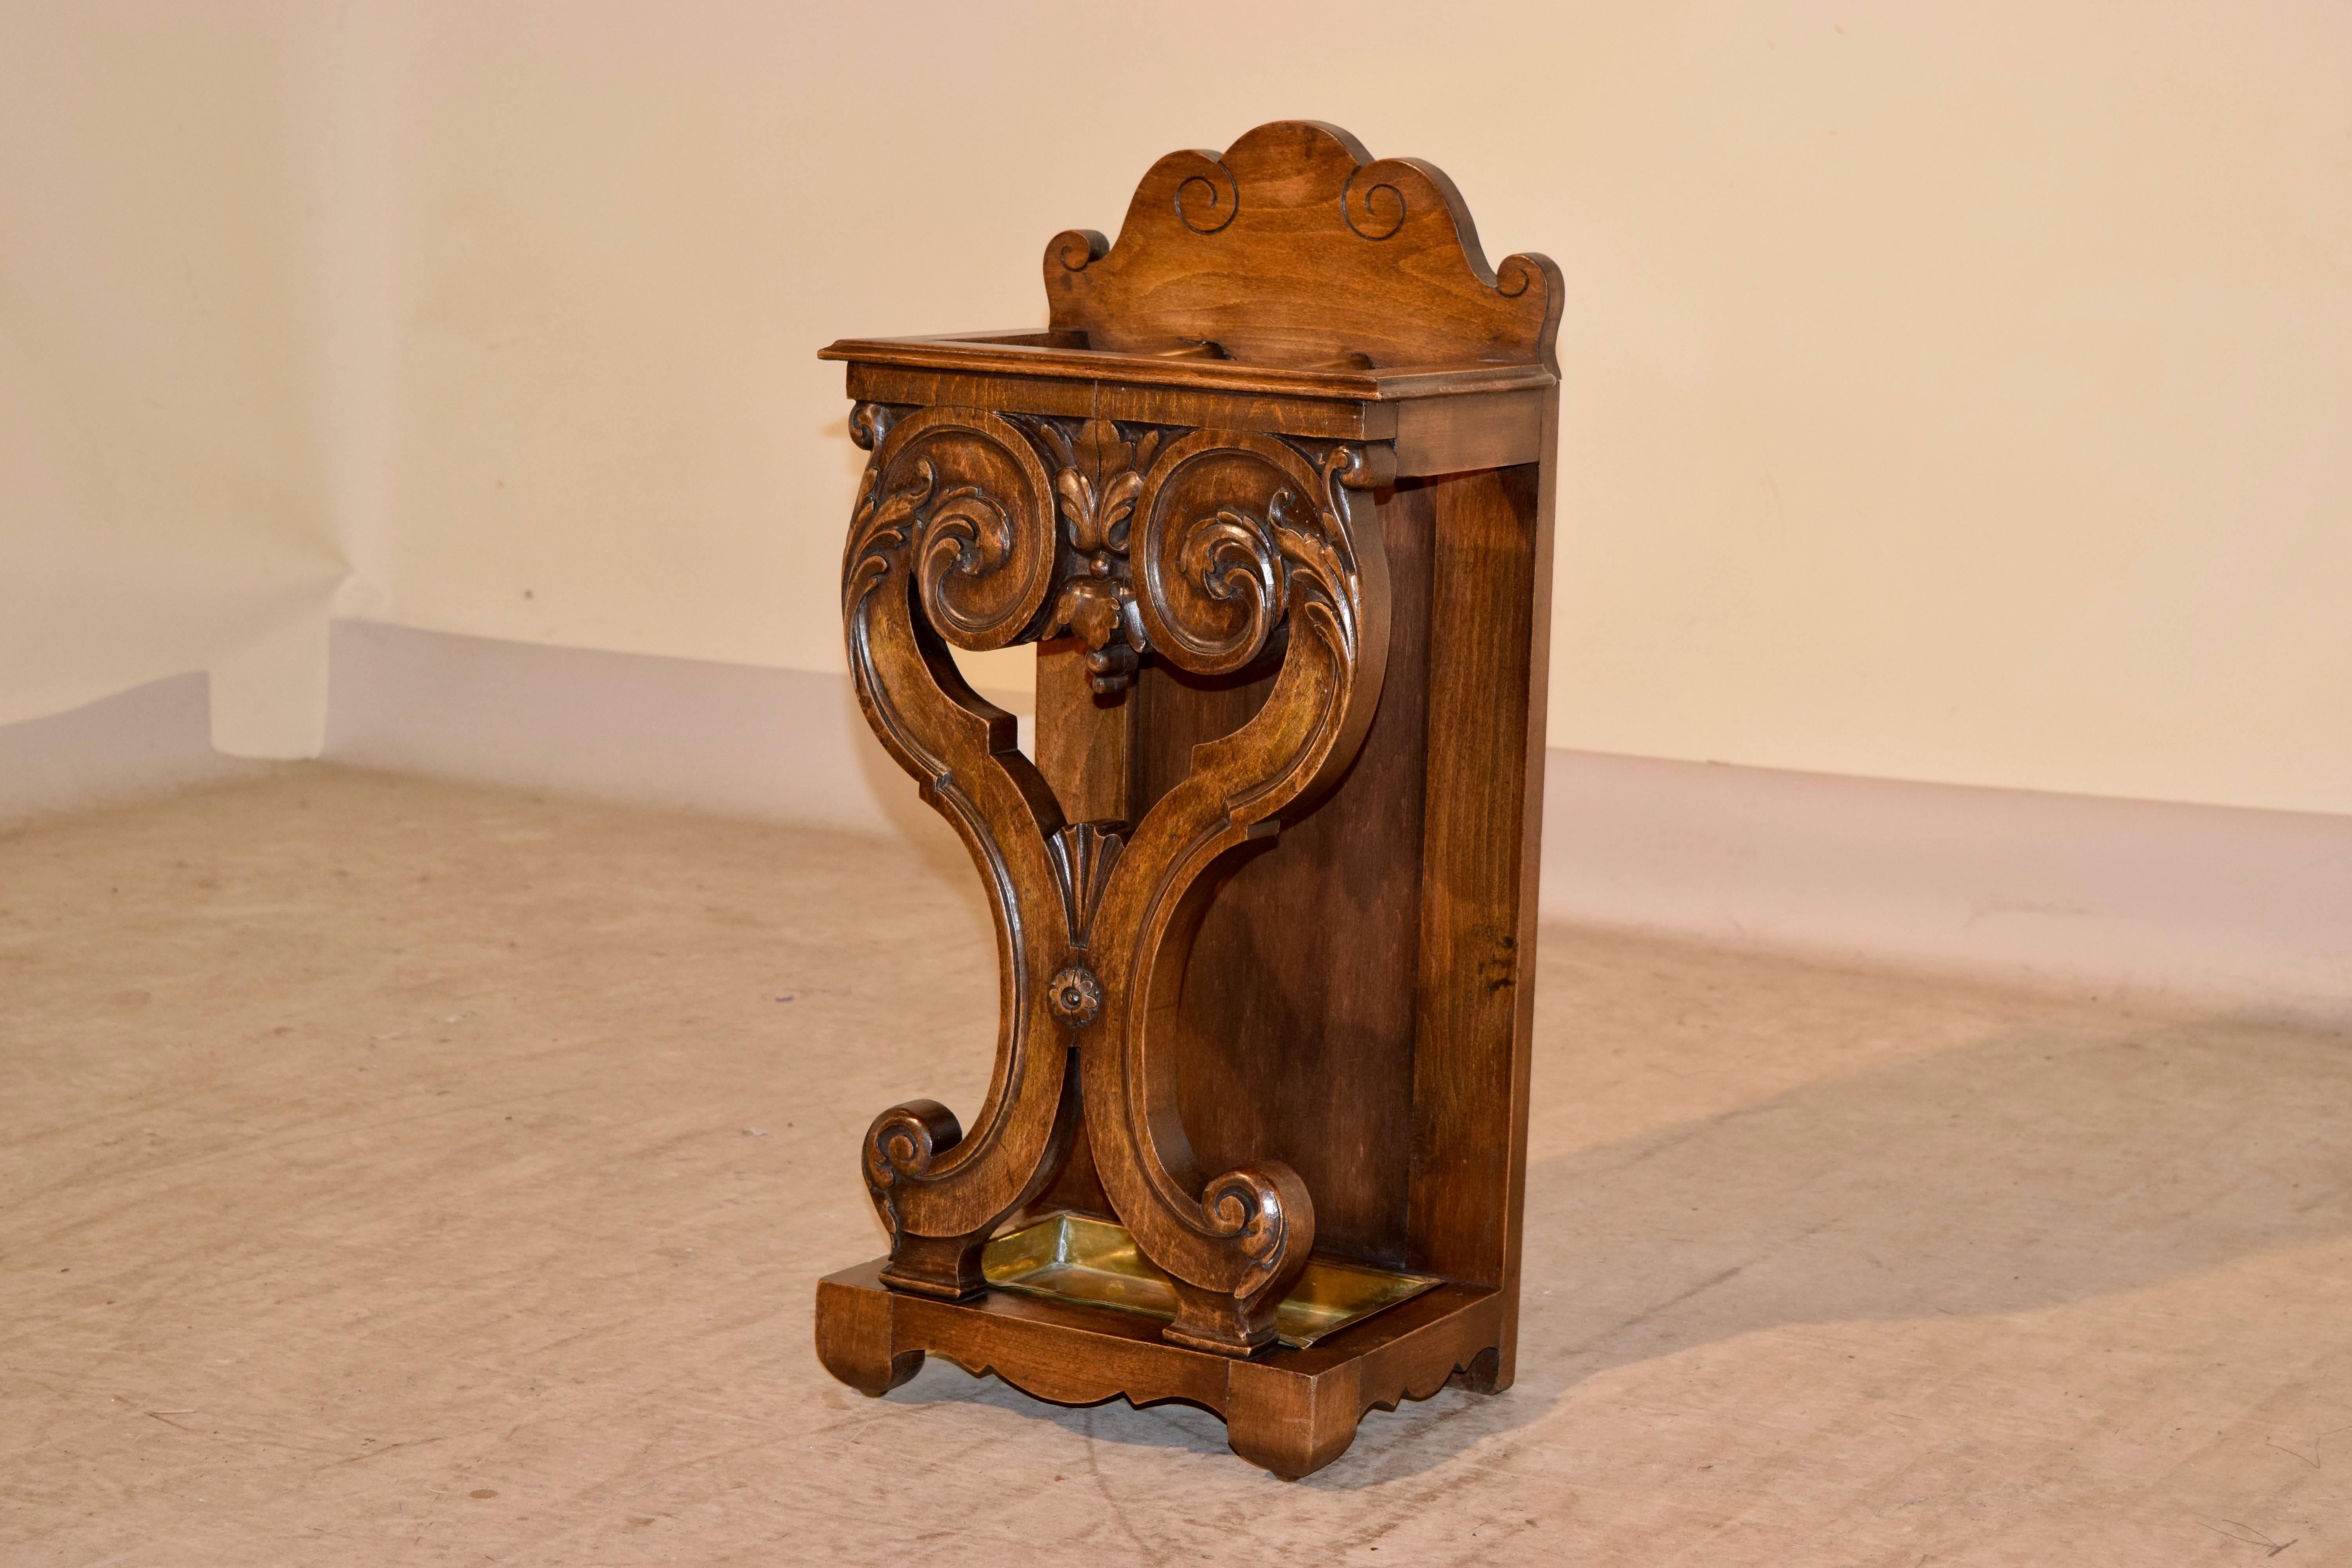 Late 19th century umbrella stand from England. The back is scalloped and has lovely decoration which enhances the gorgeous carving on the front. The base has a scalloped skirt and the original brass drip tray.